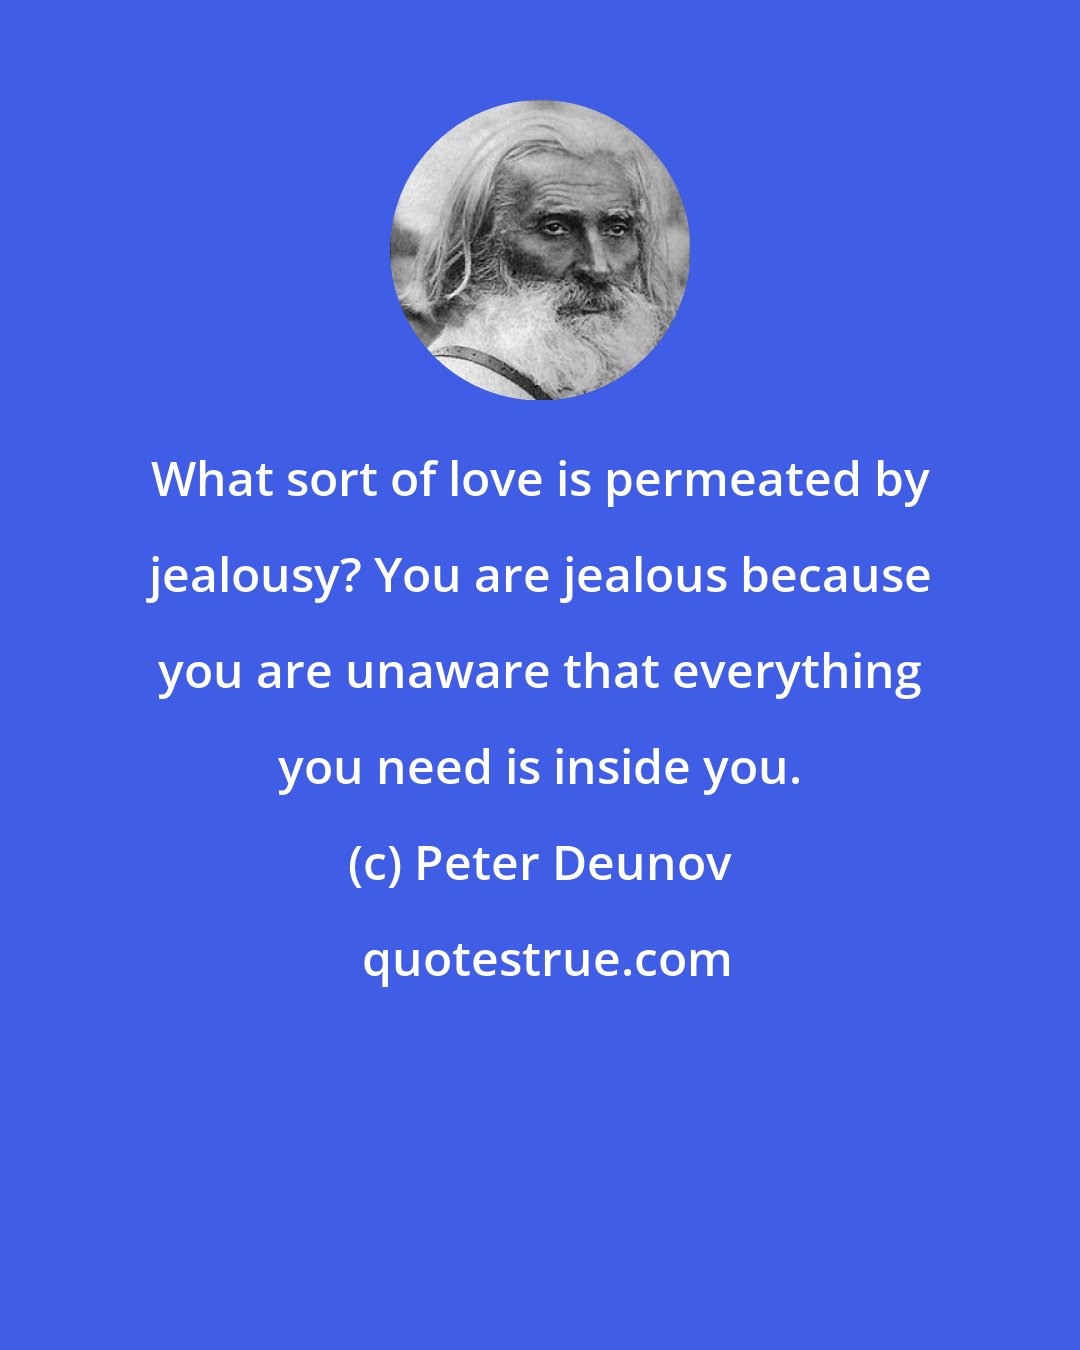 Peter Deunov: What sort of love is permeated by jealousy? You are jealous because you are unaware that everything you need is inside you.